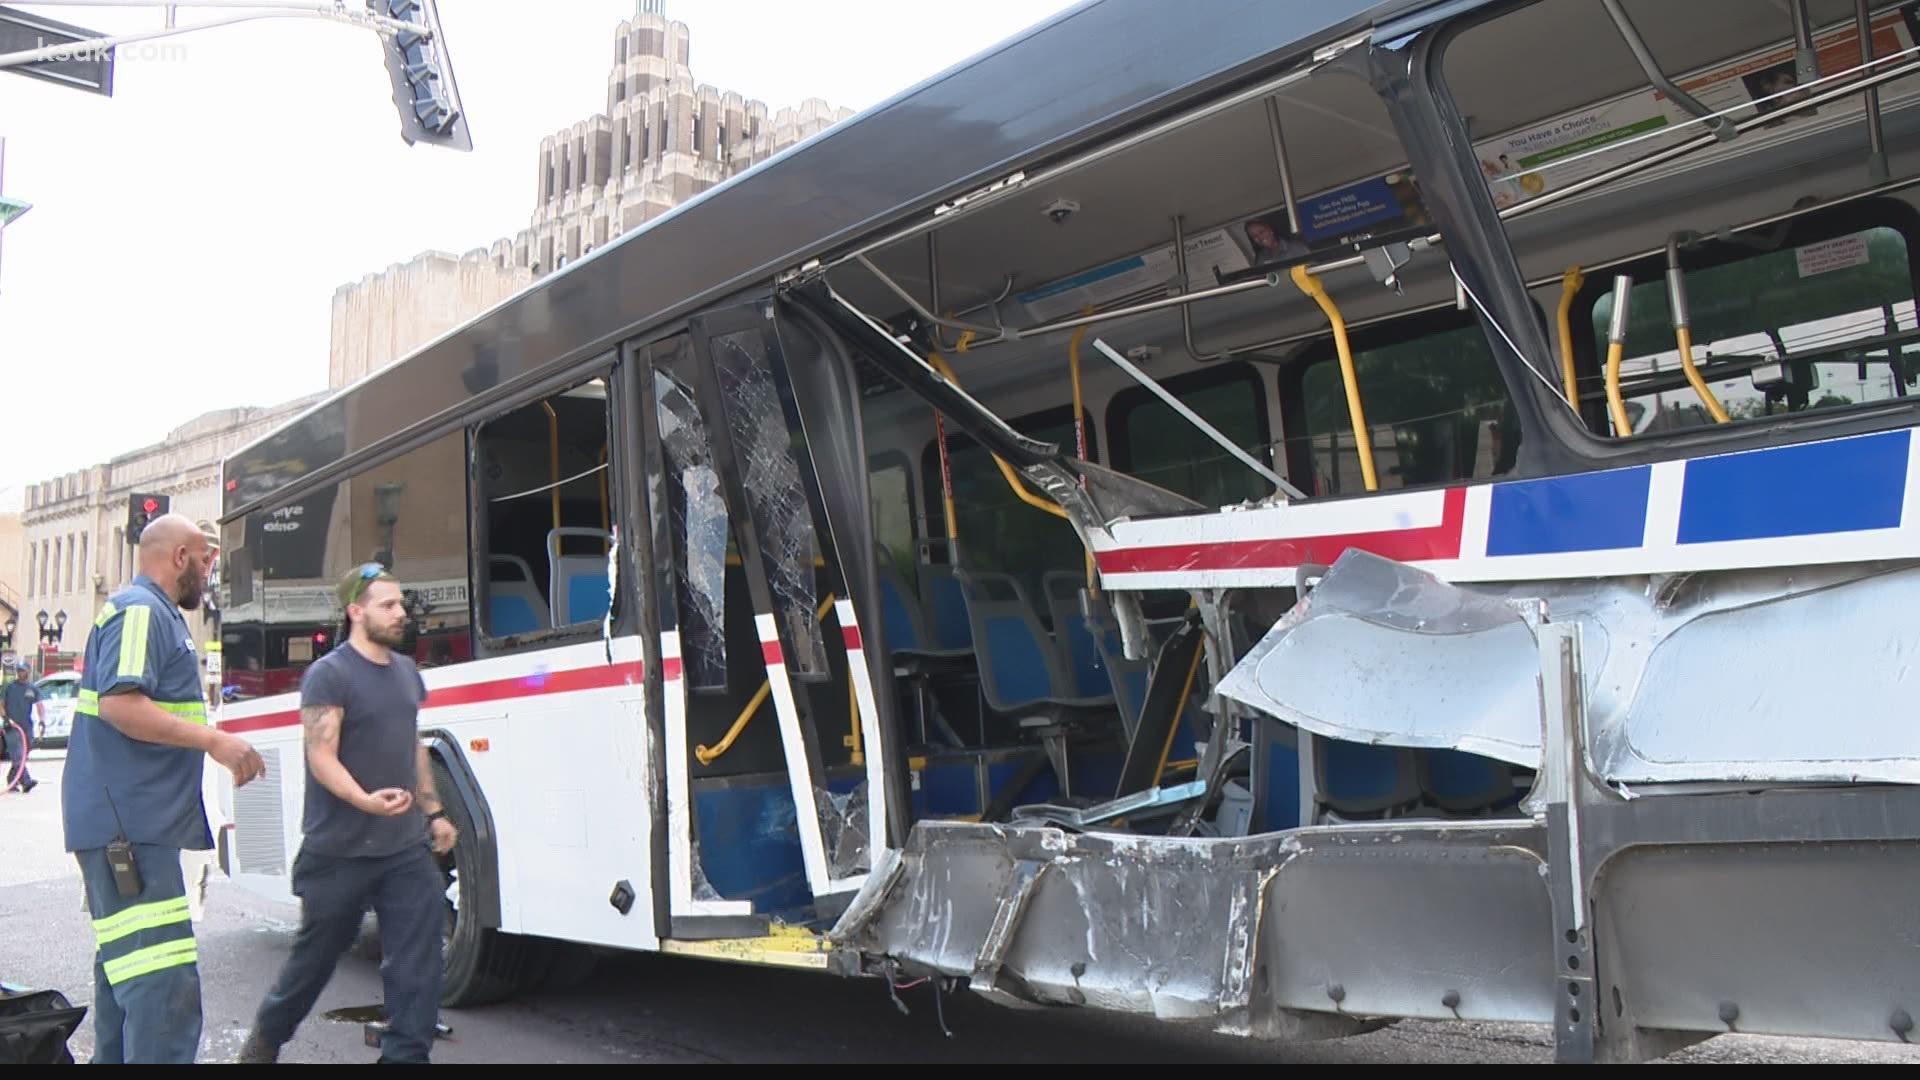 Video from inside the bus appeared to show a pickup truck crashed into the side of the bus, causing a hole in the transportation vehicle